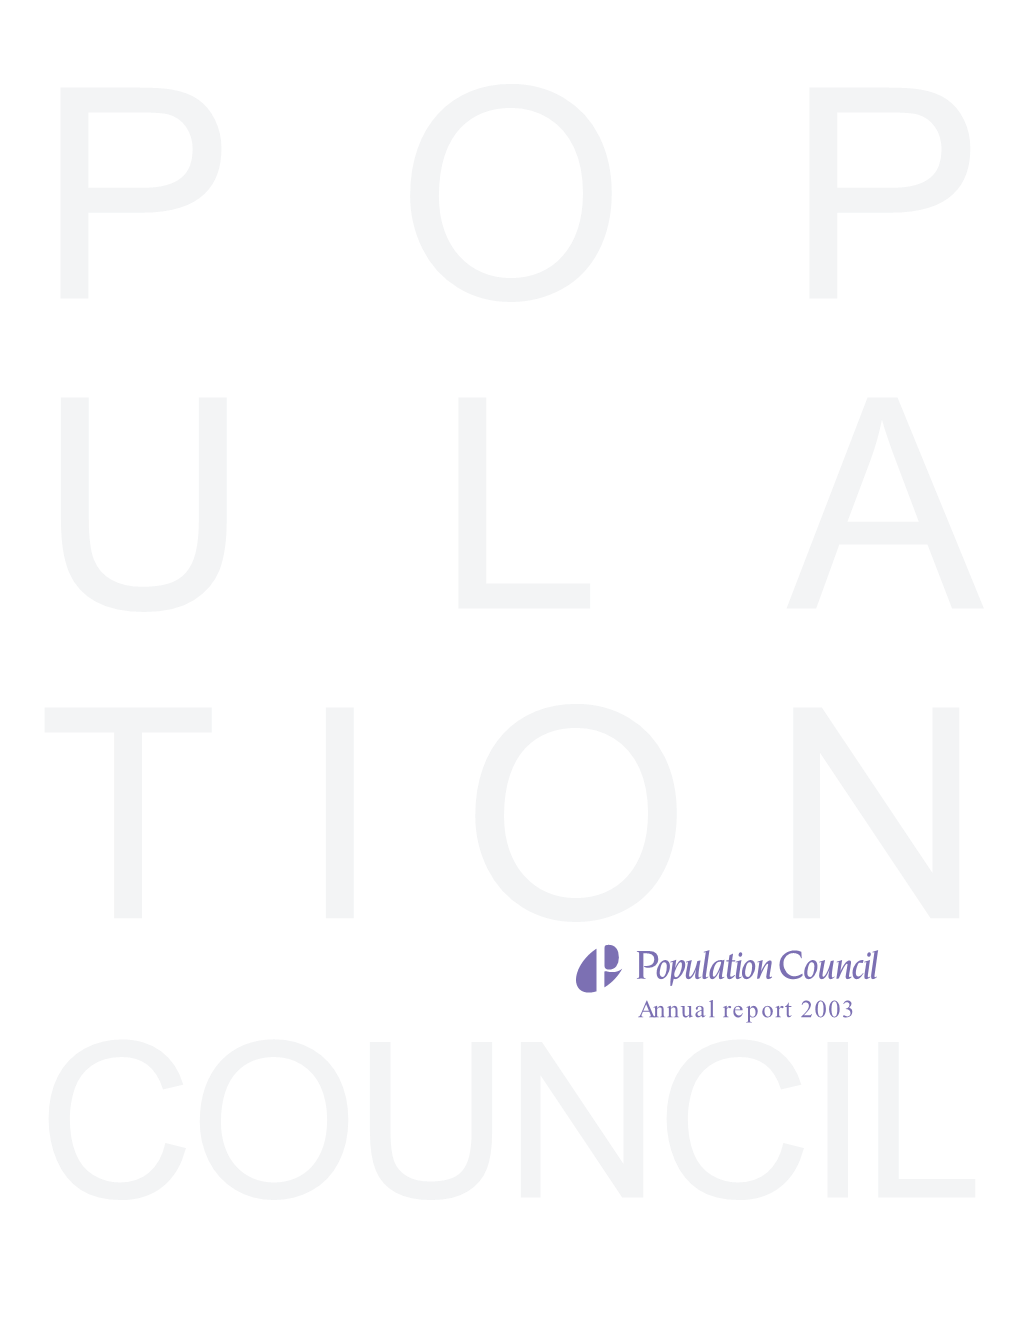 Population Council 2003 Annual Report